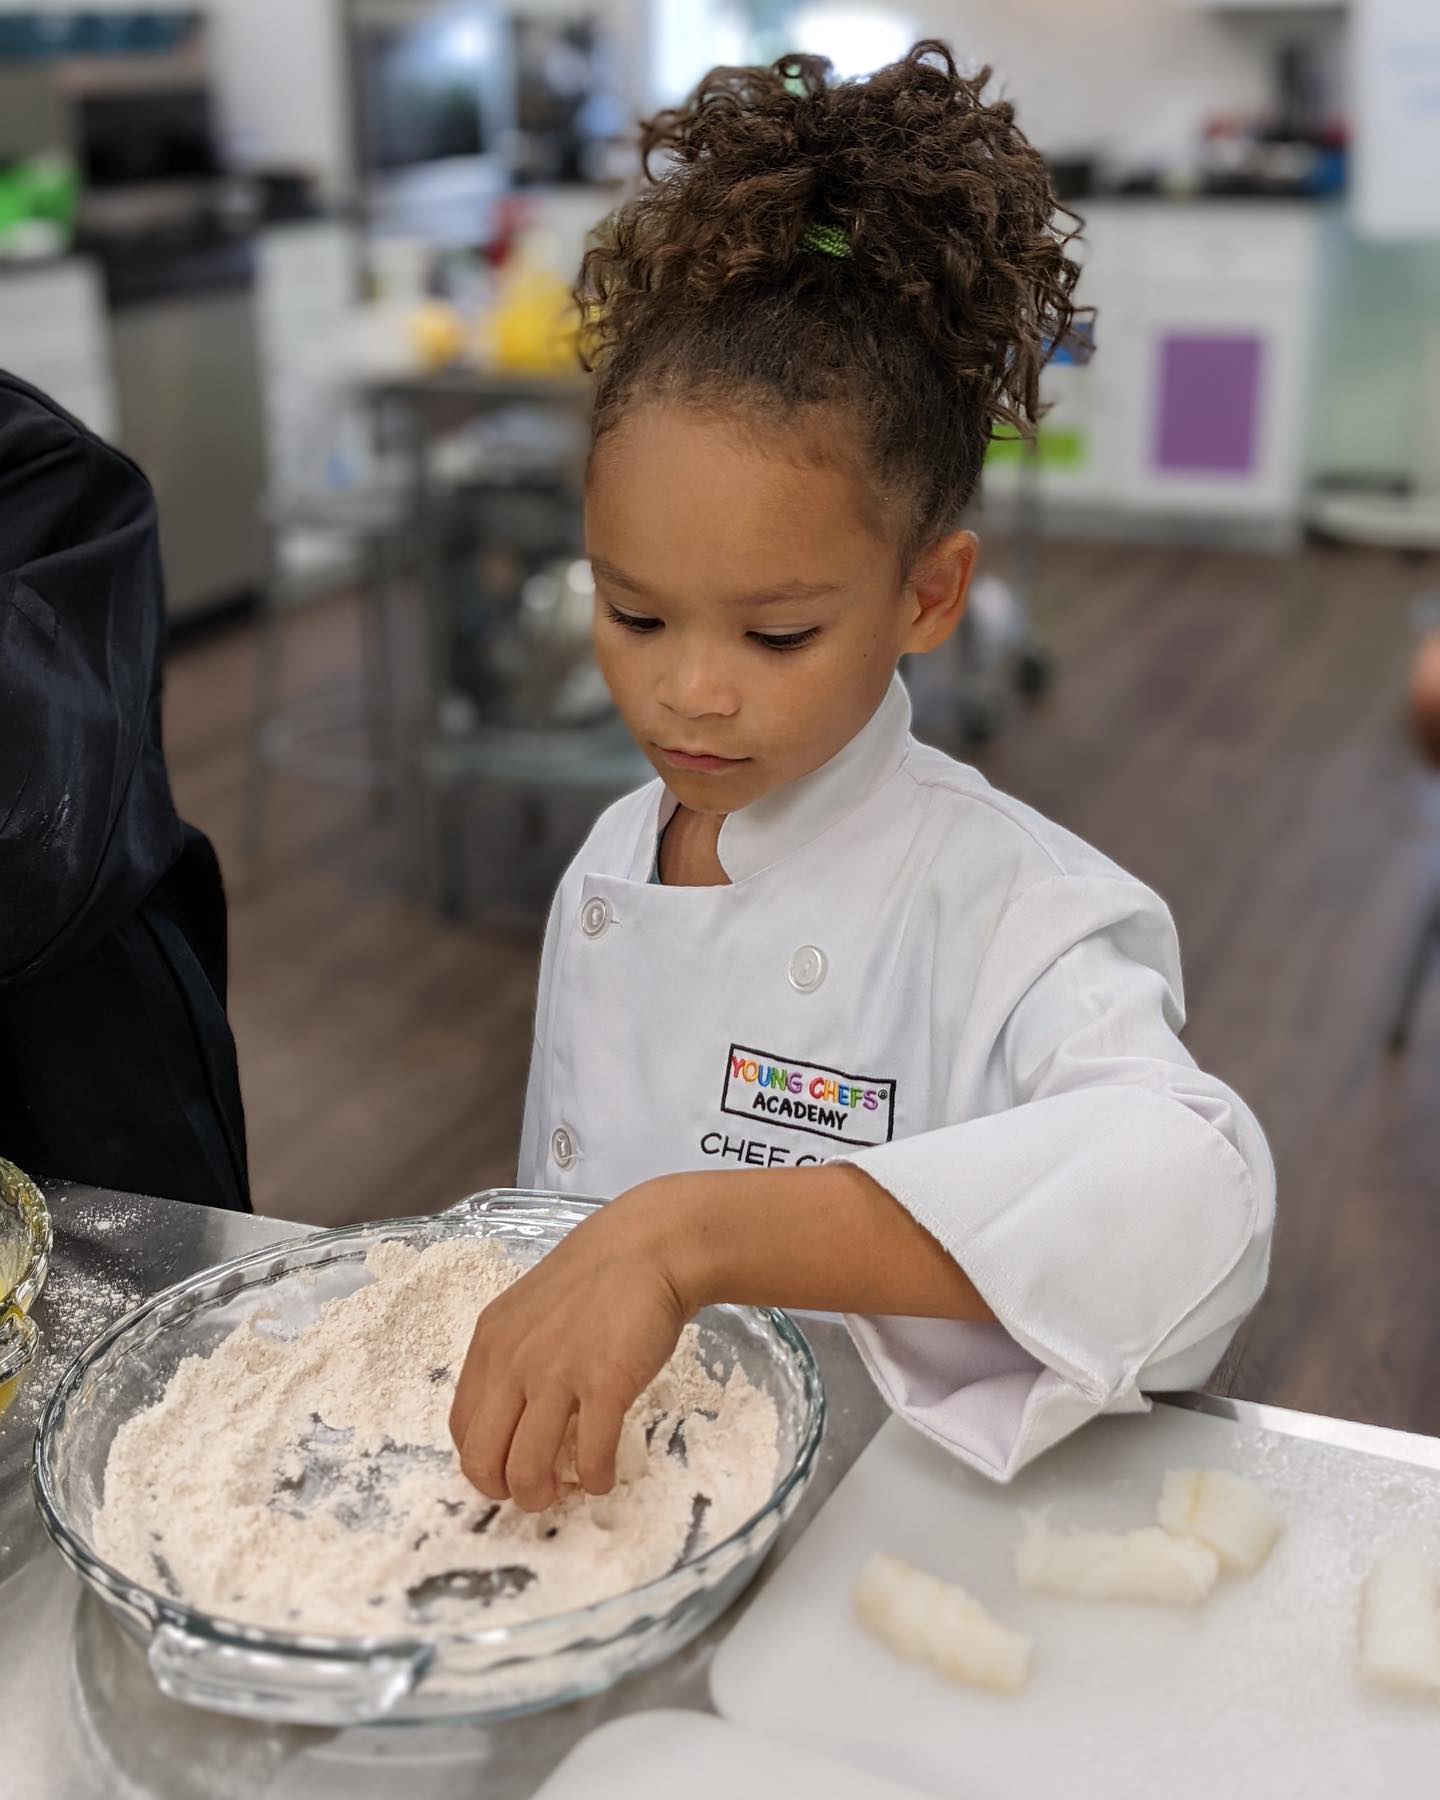 young chefs academy